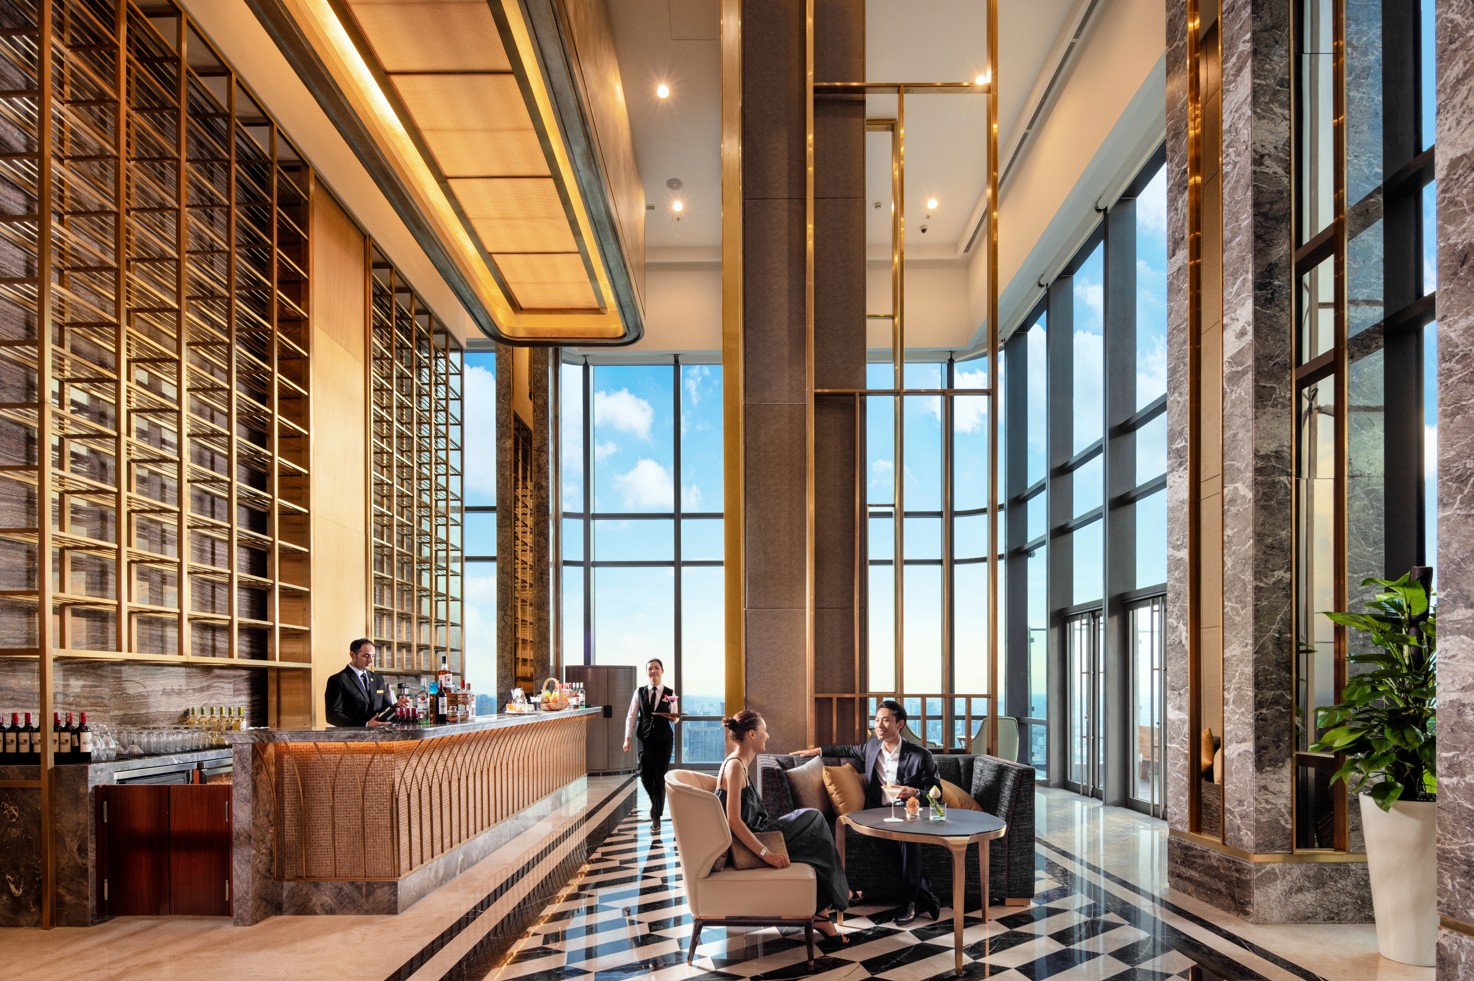 Experience A Sanctuary In The Sky: Vinpearl Landmark 81 - Autograph Collection Crafts Experiences Above The Clouds